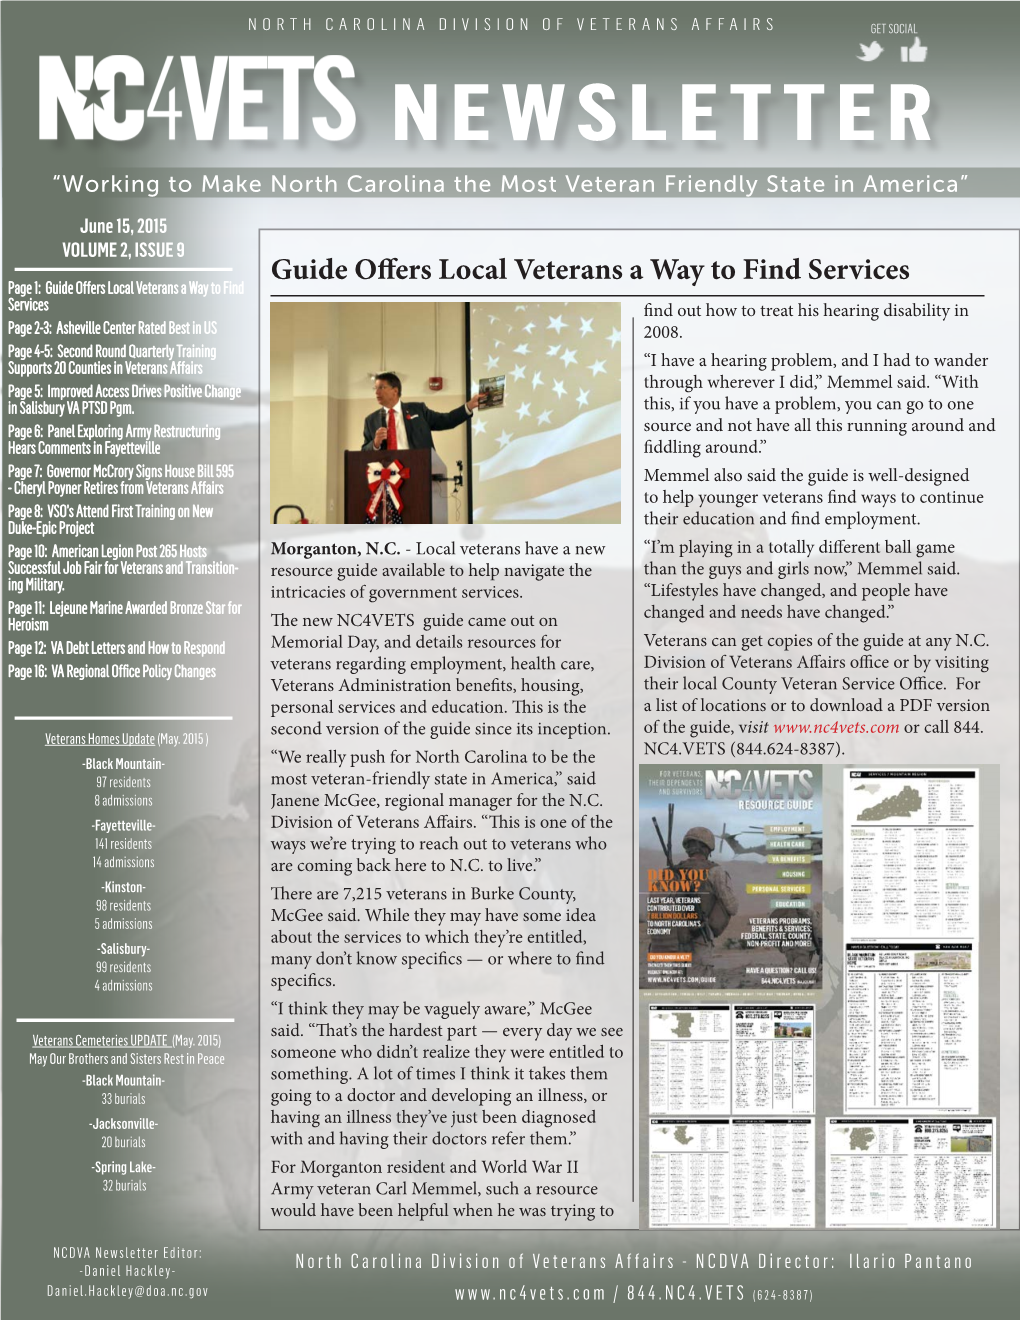 NEWSLETTER “Working to Make North Carolina the Most Veteran Friendly State in America”